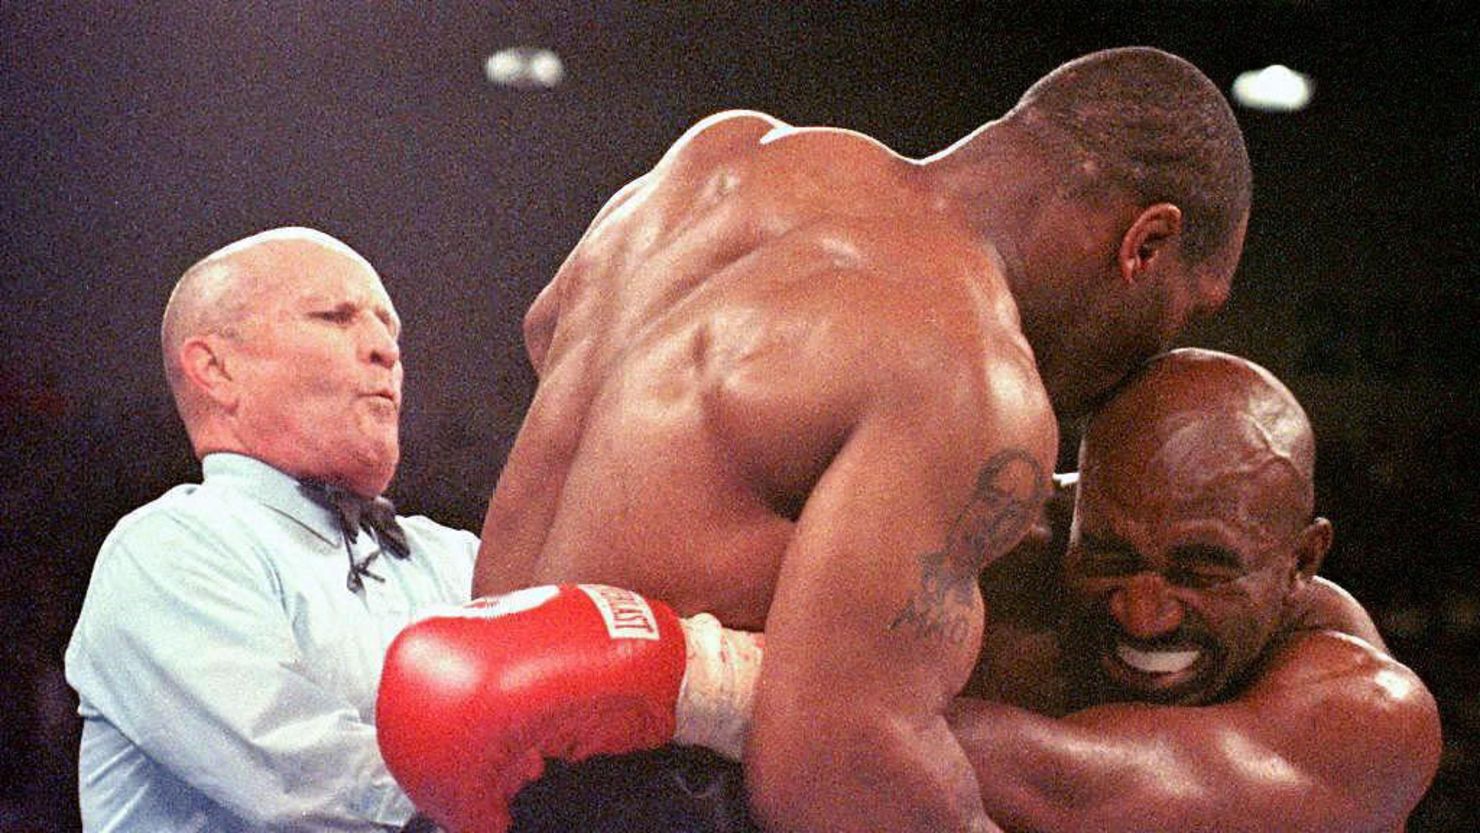 Referee Lane Mills stepped in after Mike Tyson bit Evander Holyfield's ear in the third round of their 1997 WBA Heavyweight Championship Fight at the MGM Grand Garden Arena in Las Vegas, NV.